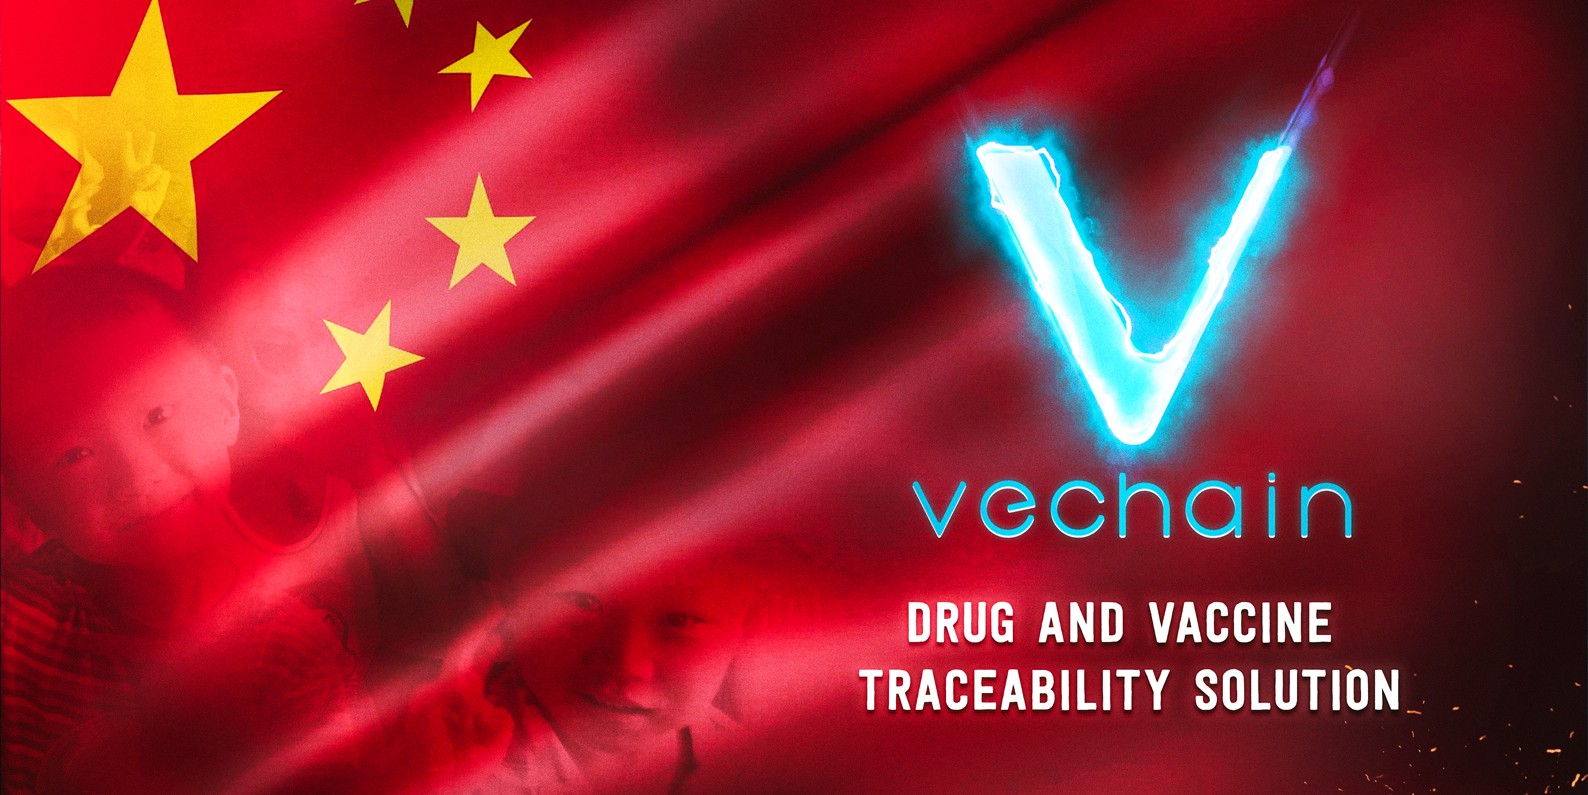 VeChain (VEN) Unveils Drug and Vaccine Traceability Solution For Over 30 Million People